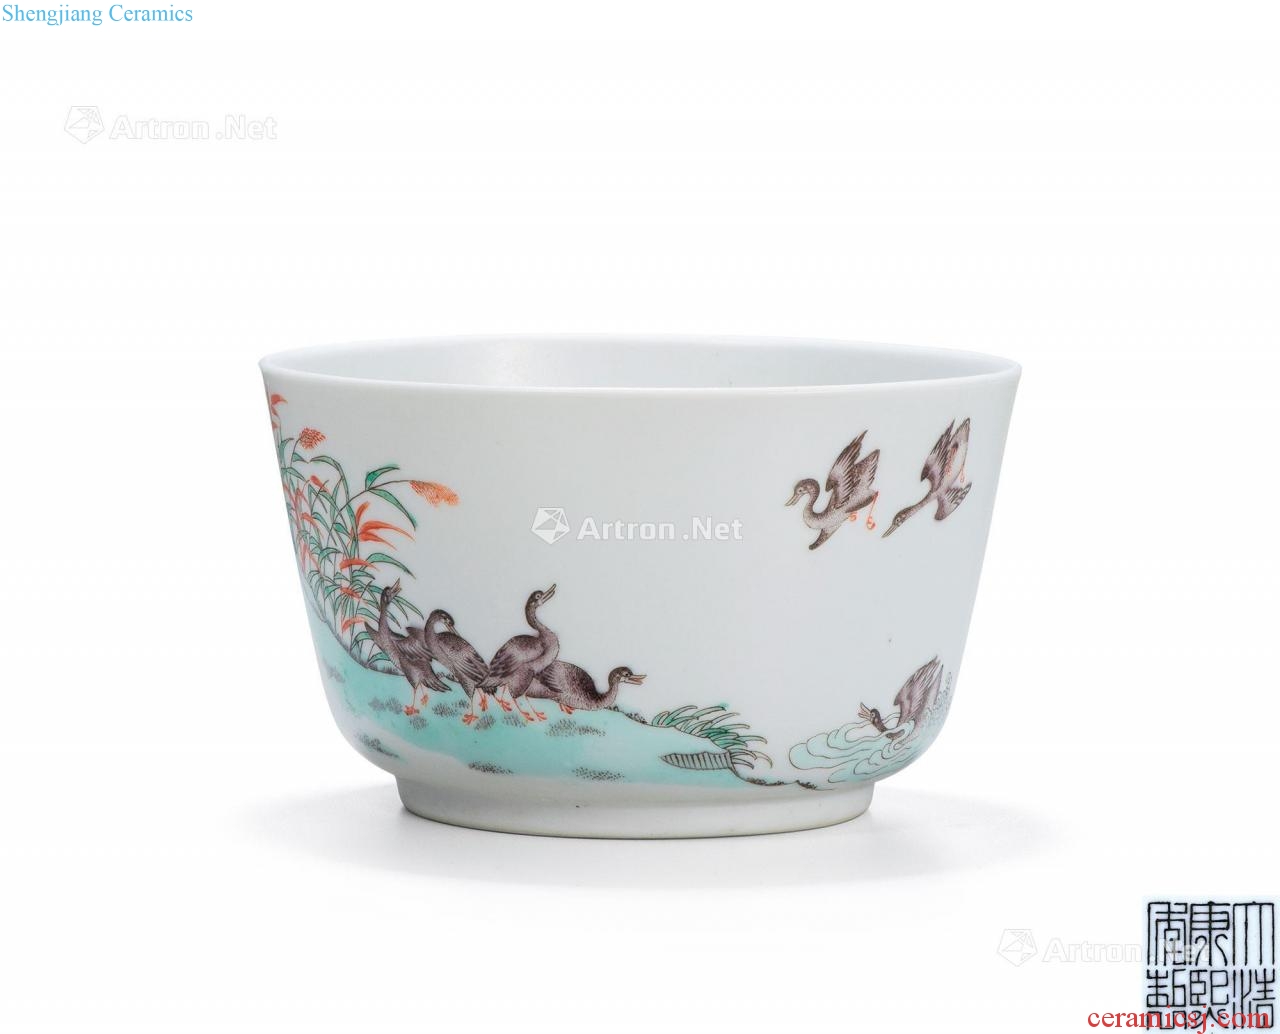 Qing, tire in the 19th century colorful "fly song lodge feed" figure pier bowl